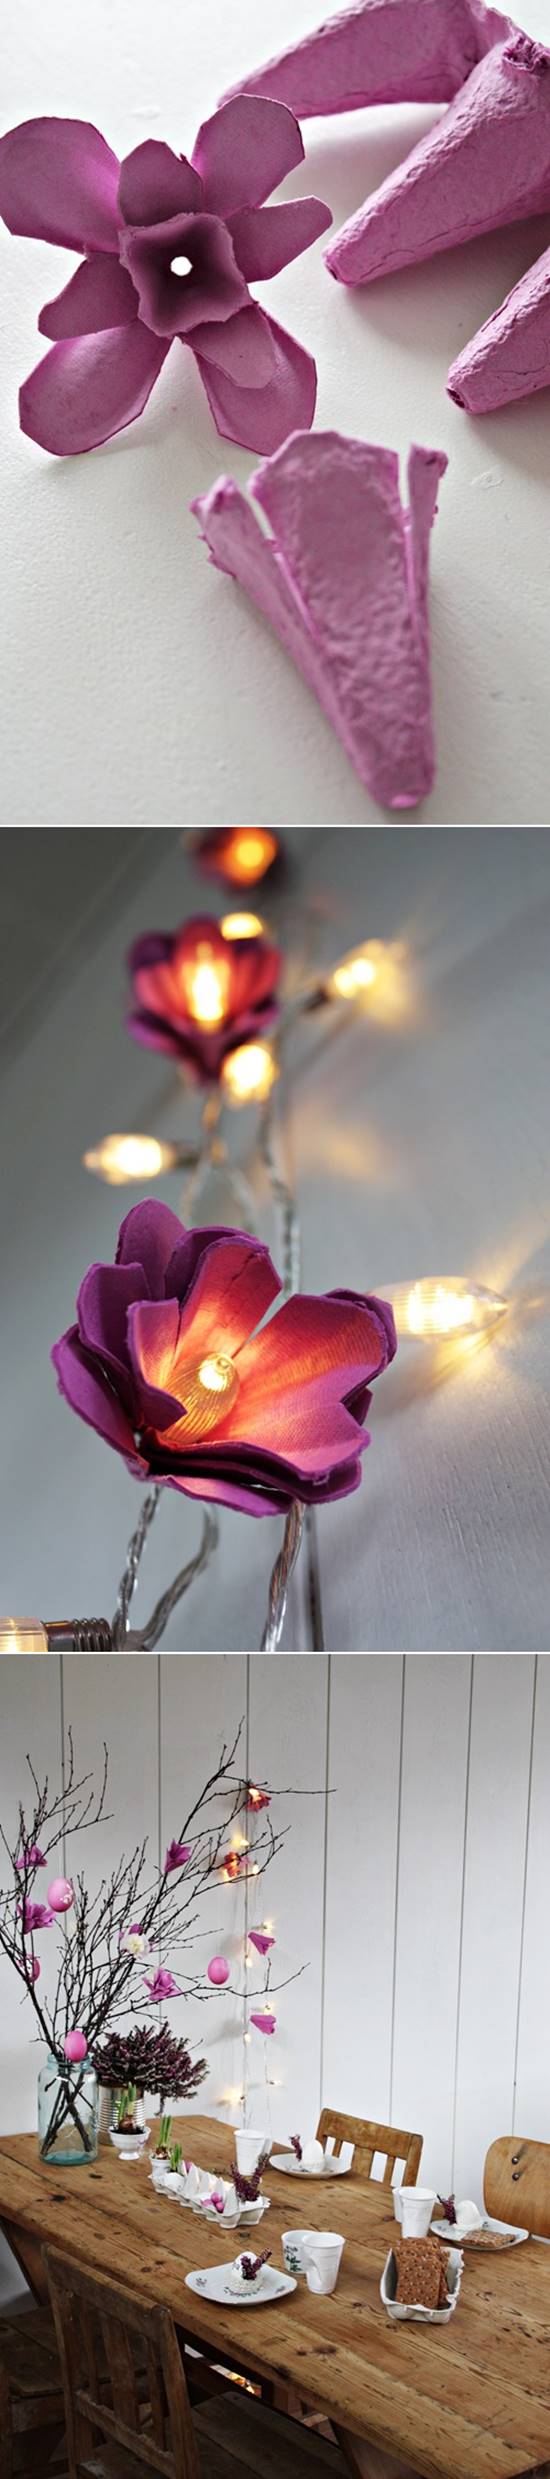 How to Make Beautiful Flower Lights from Egg Cartons